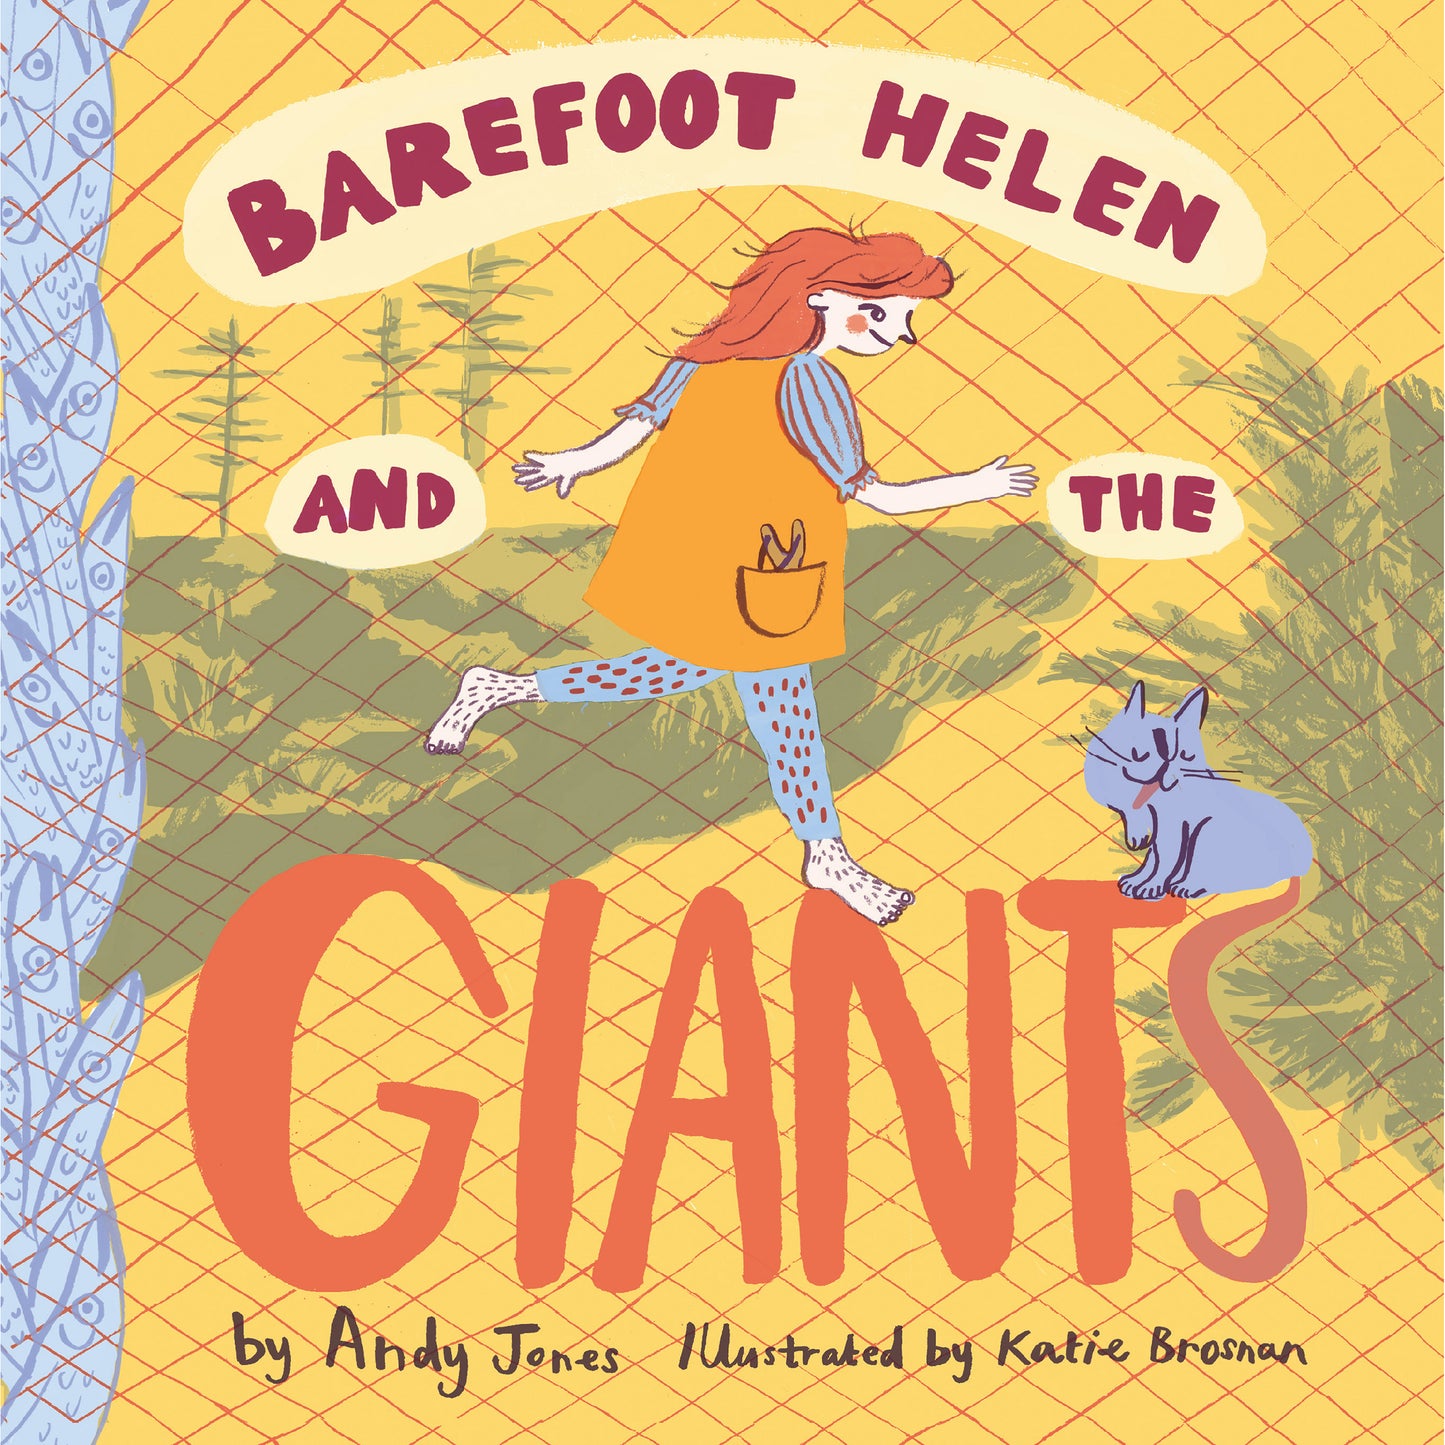 Barefoot Helen and the Giants (audiobook narrated by Andy Jones)